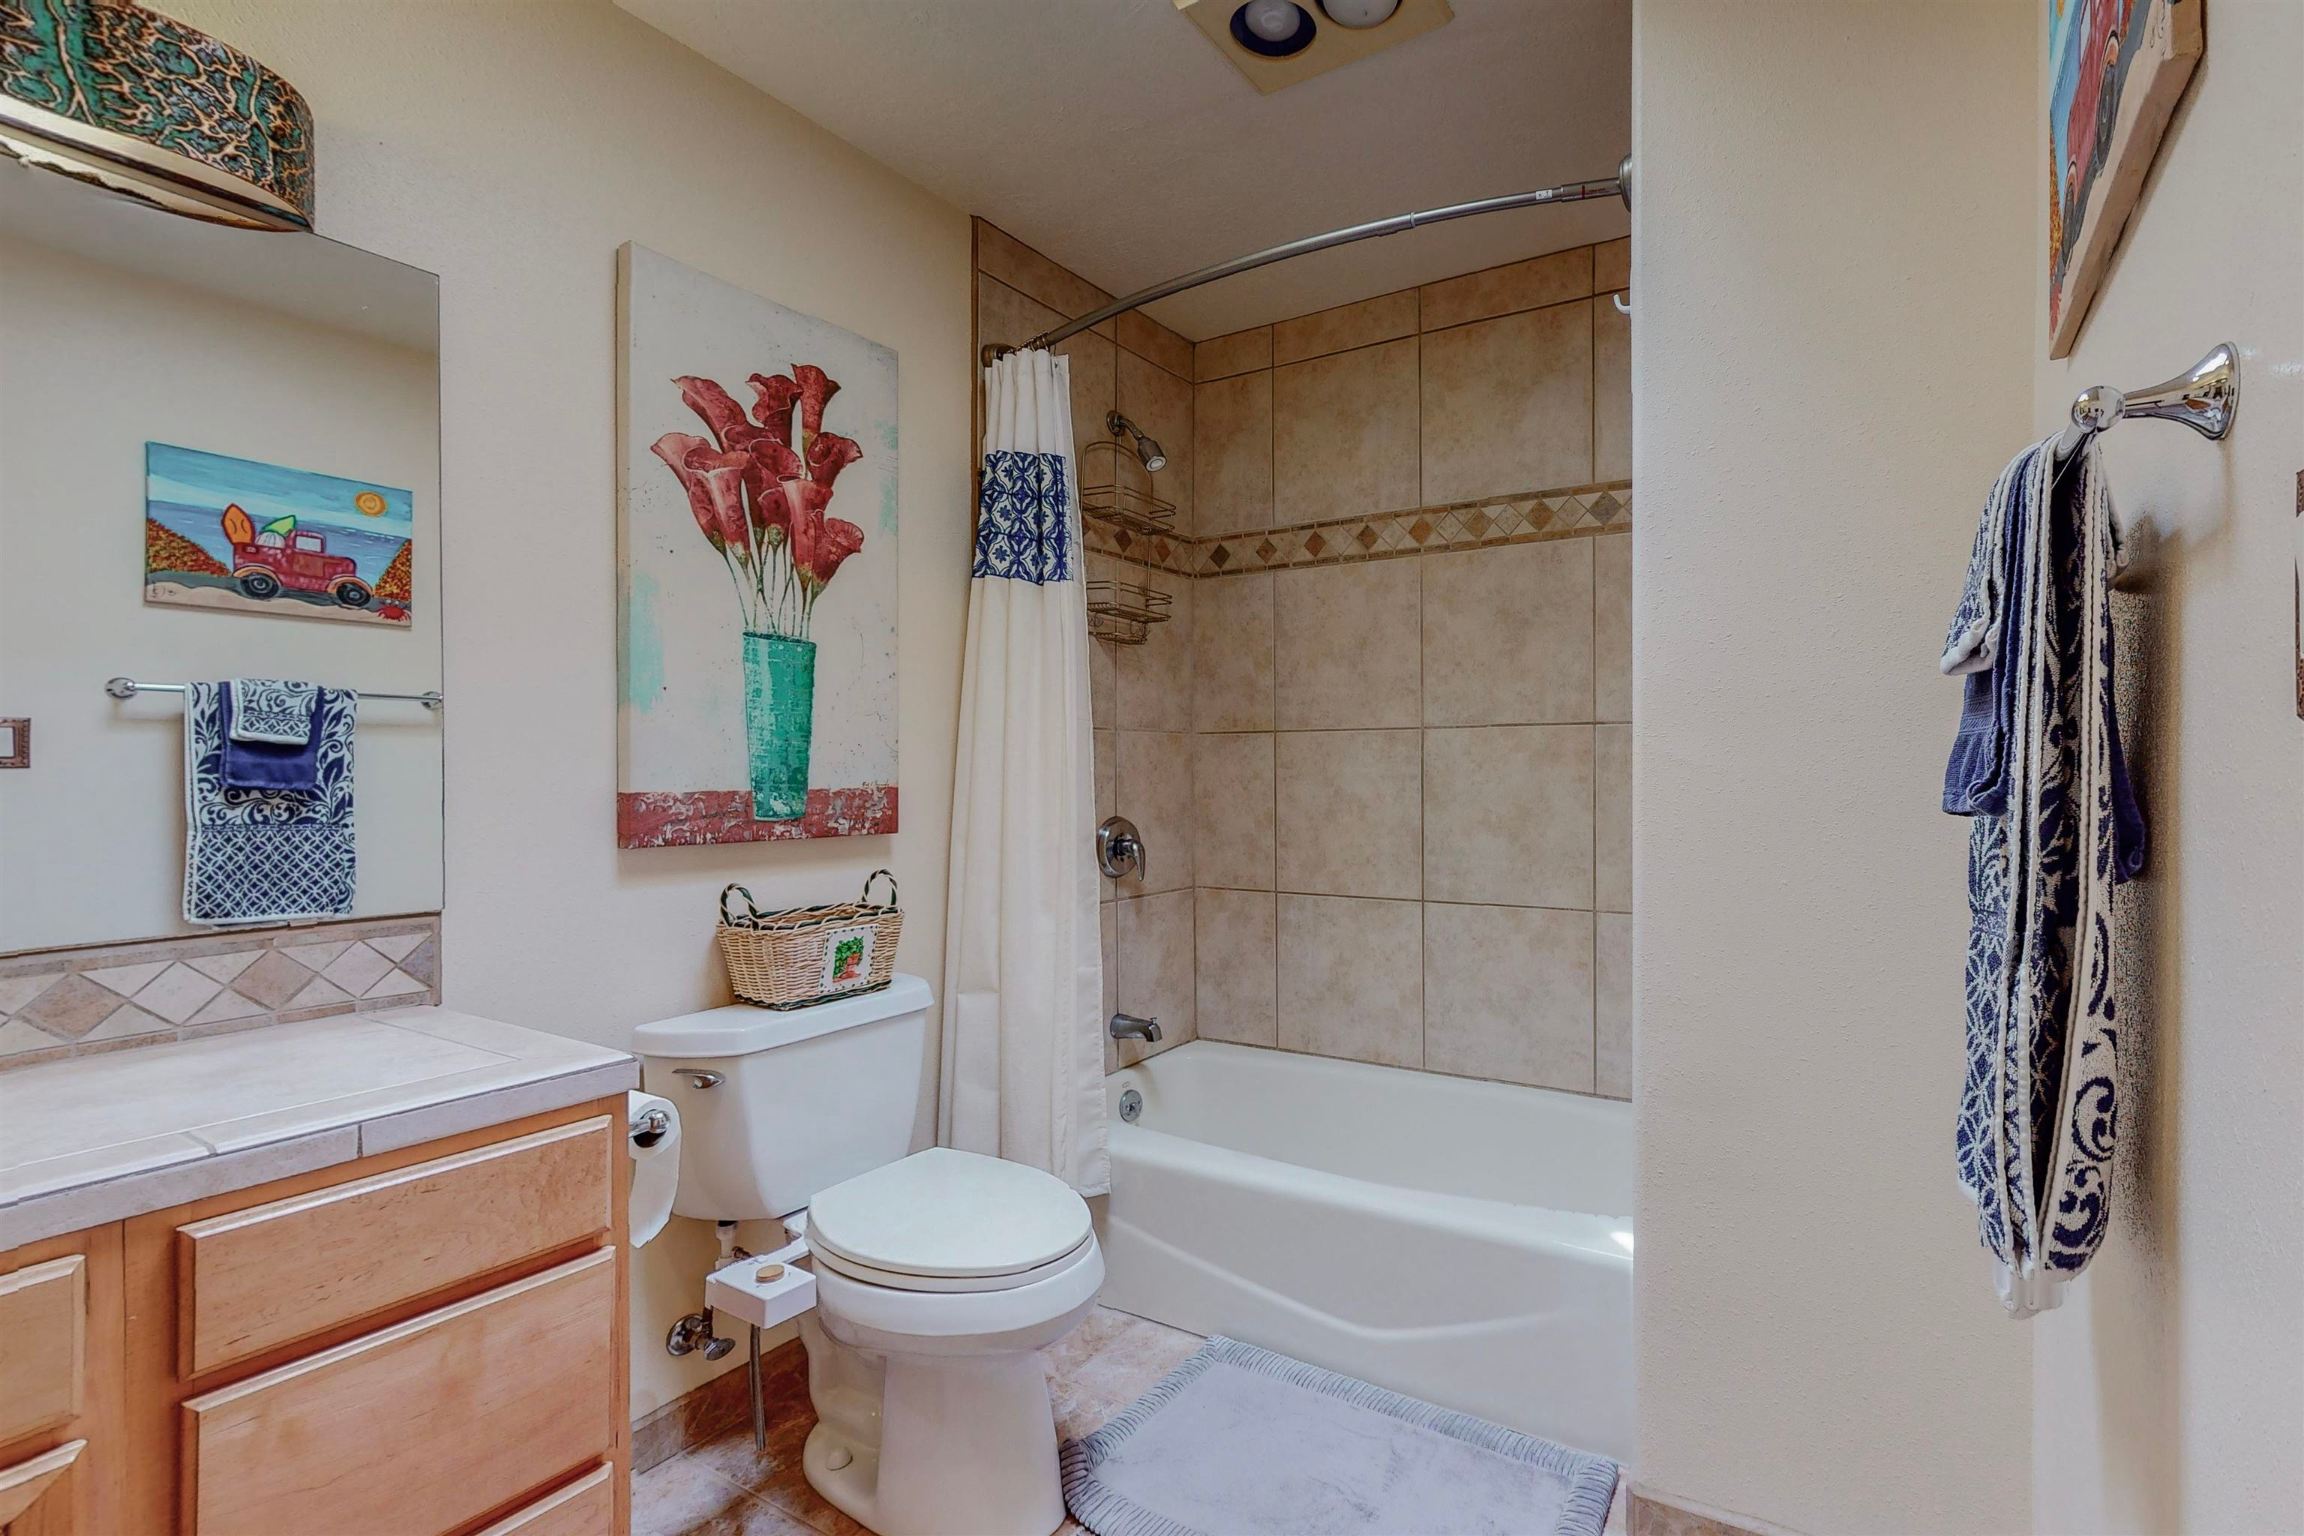 2921 CLIFF PALACE, Santa Fe, New Mexico 87507, 3 Bedrooms Bedrooms, ,2 BathroomsBathrooms,Residential,For Sale,2921 CLIFF PALACE,202201840